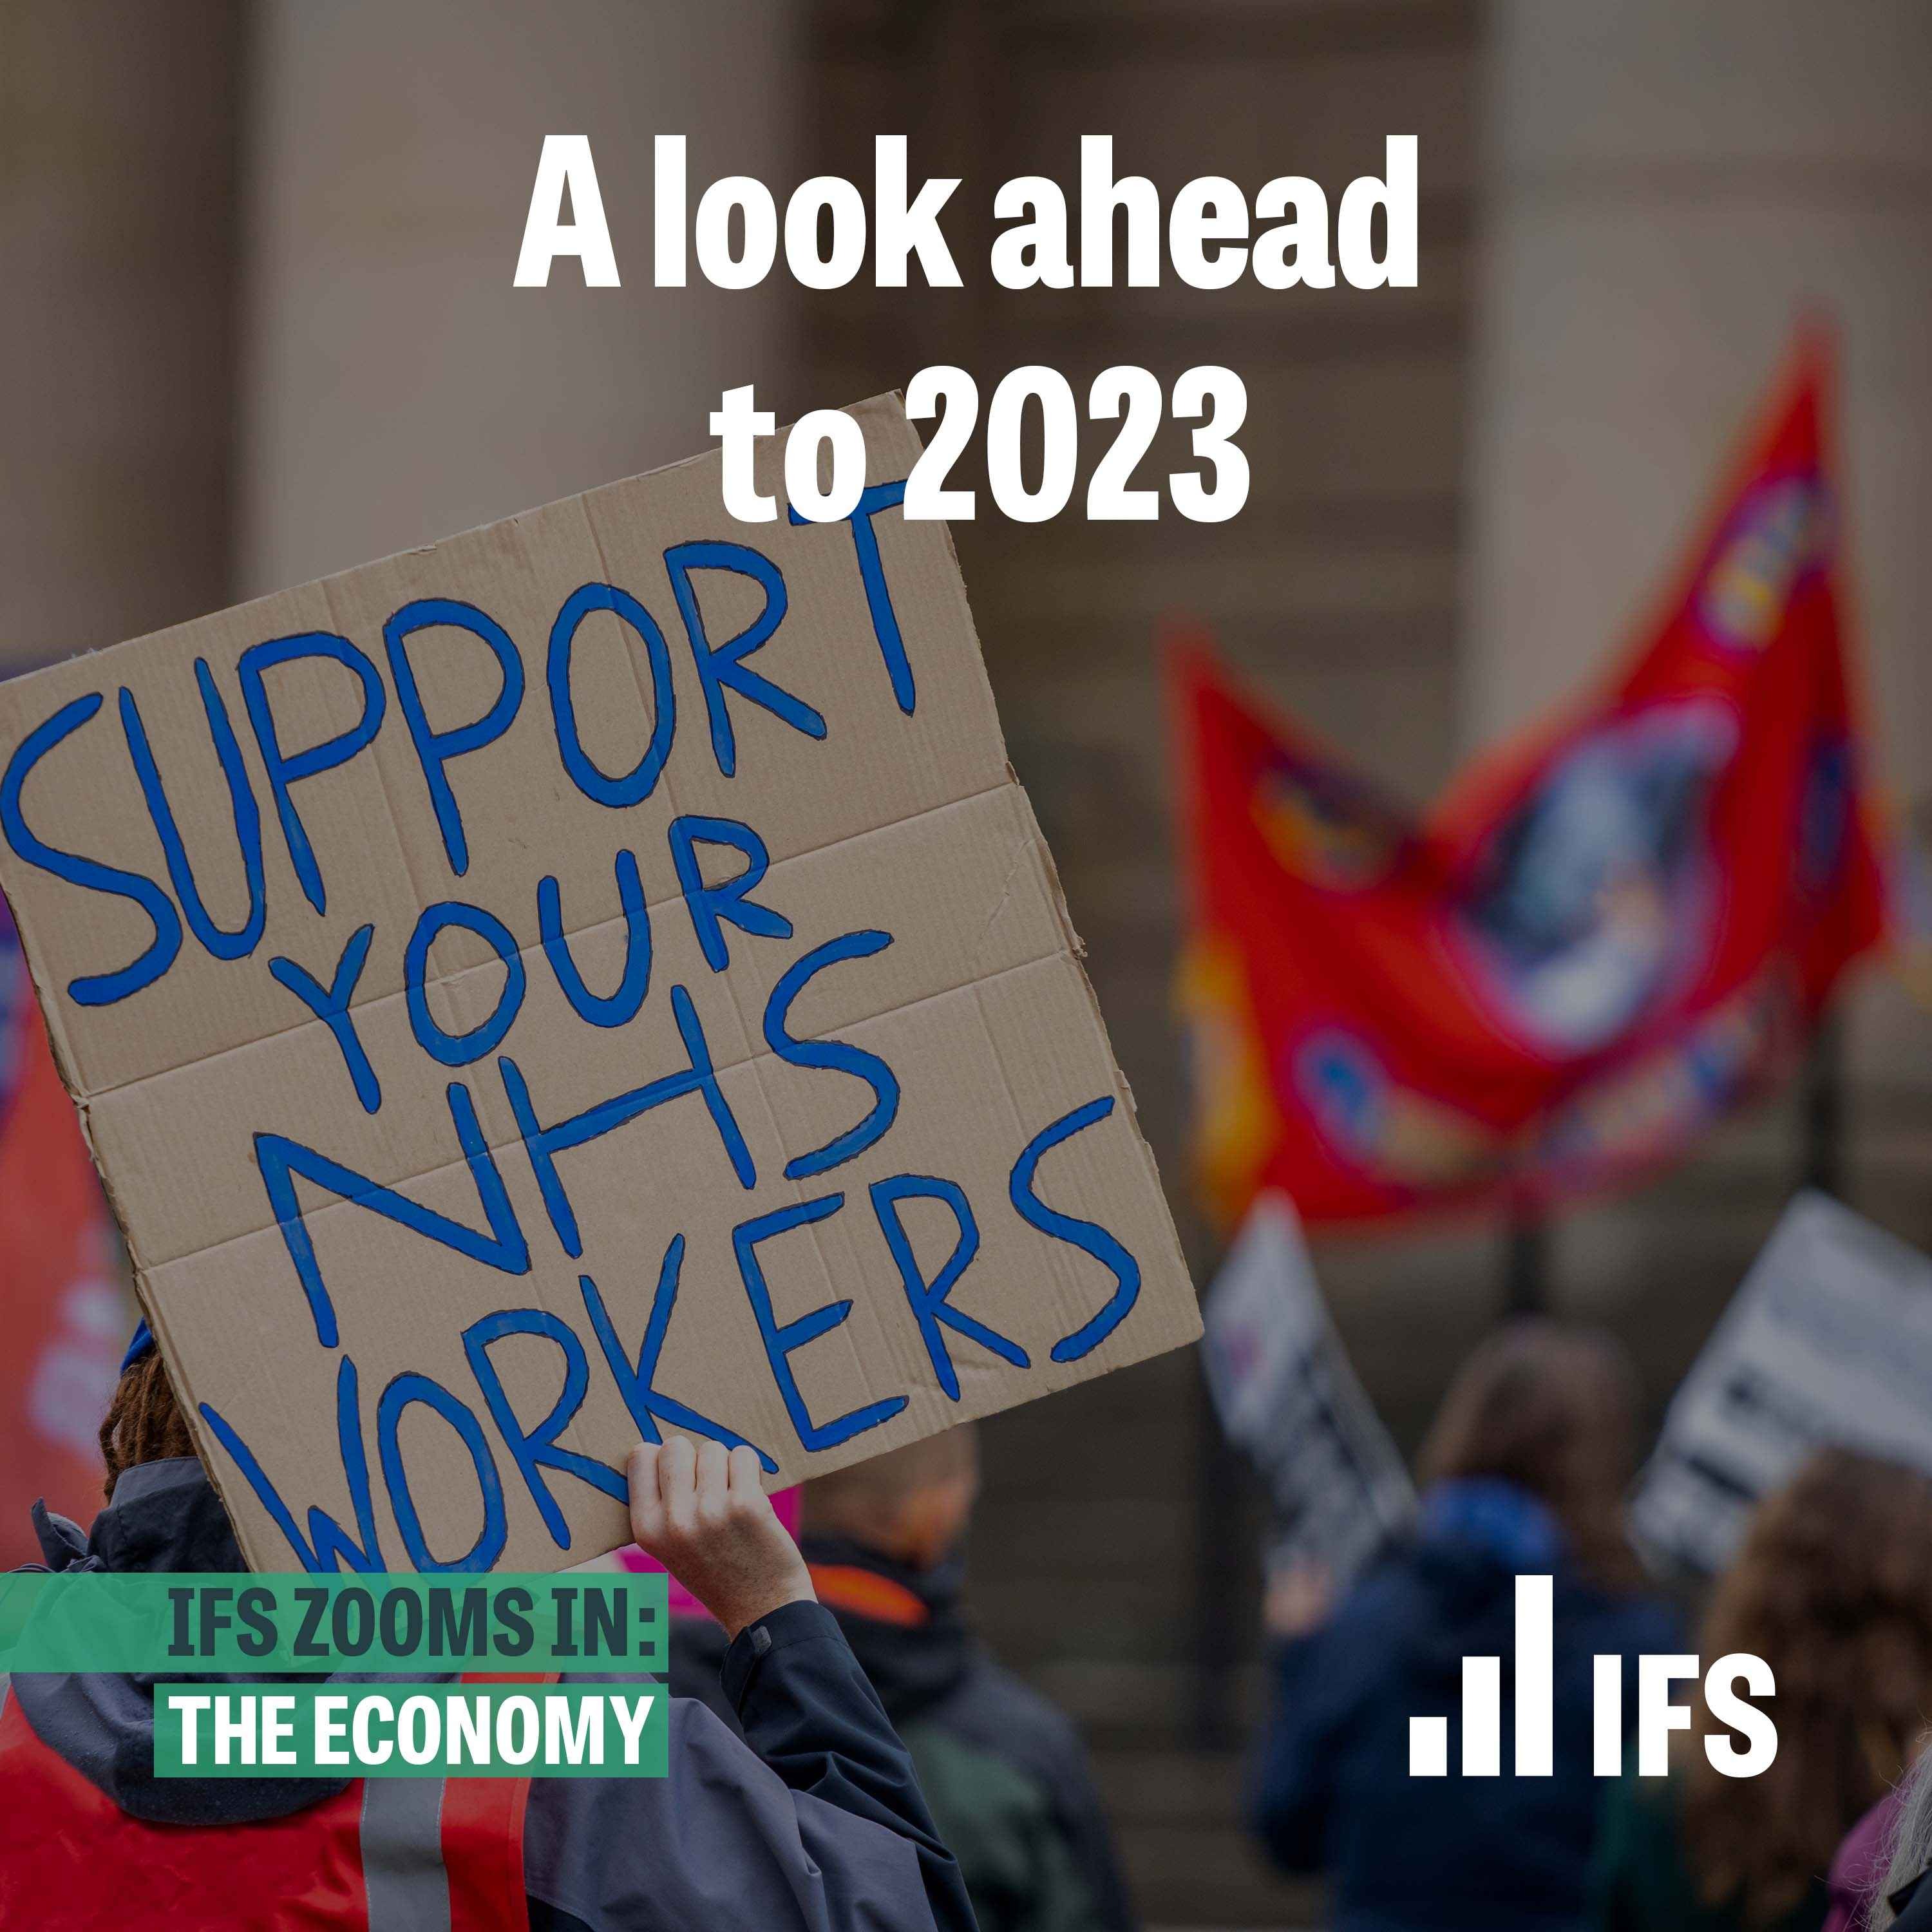 Strikes, Budgets, Brexit and elections: a look ahead to 2023